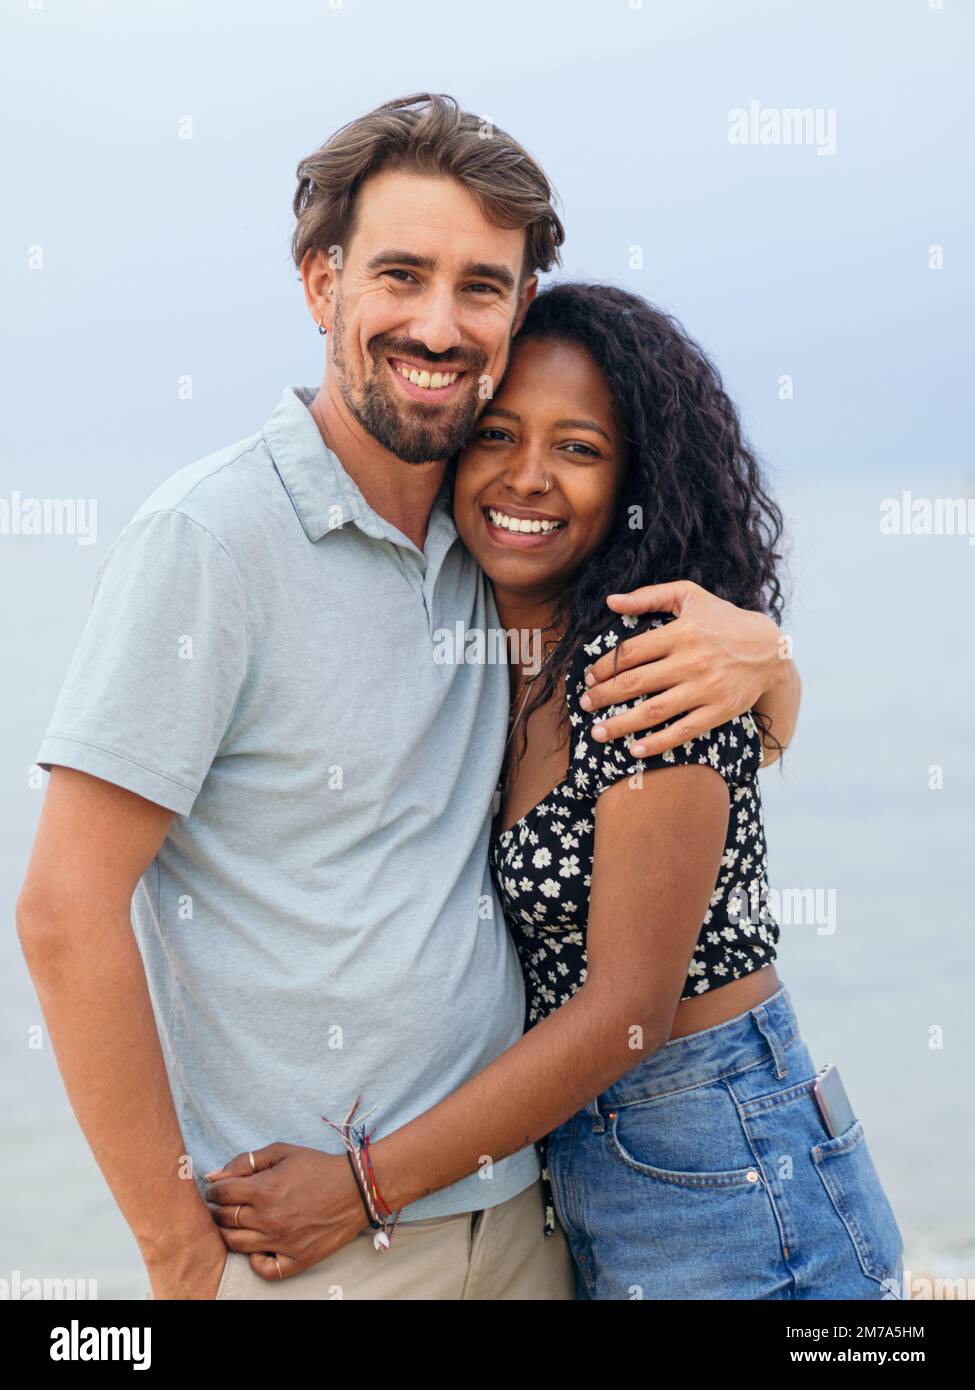 Young heterosexual couple smiling and embracing looking at camera. Concept of honeymoon, valentine's day Stock Photo